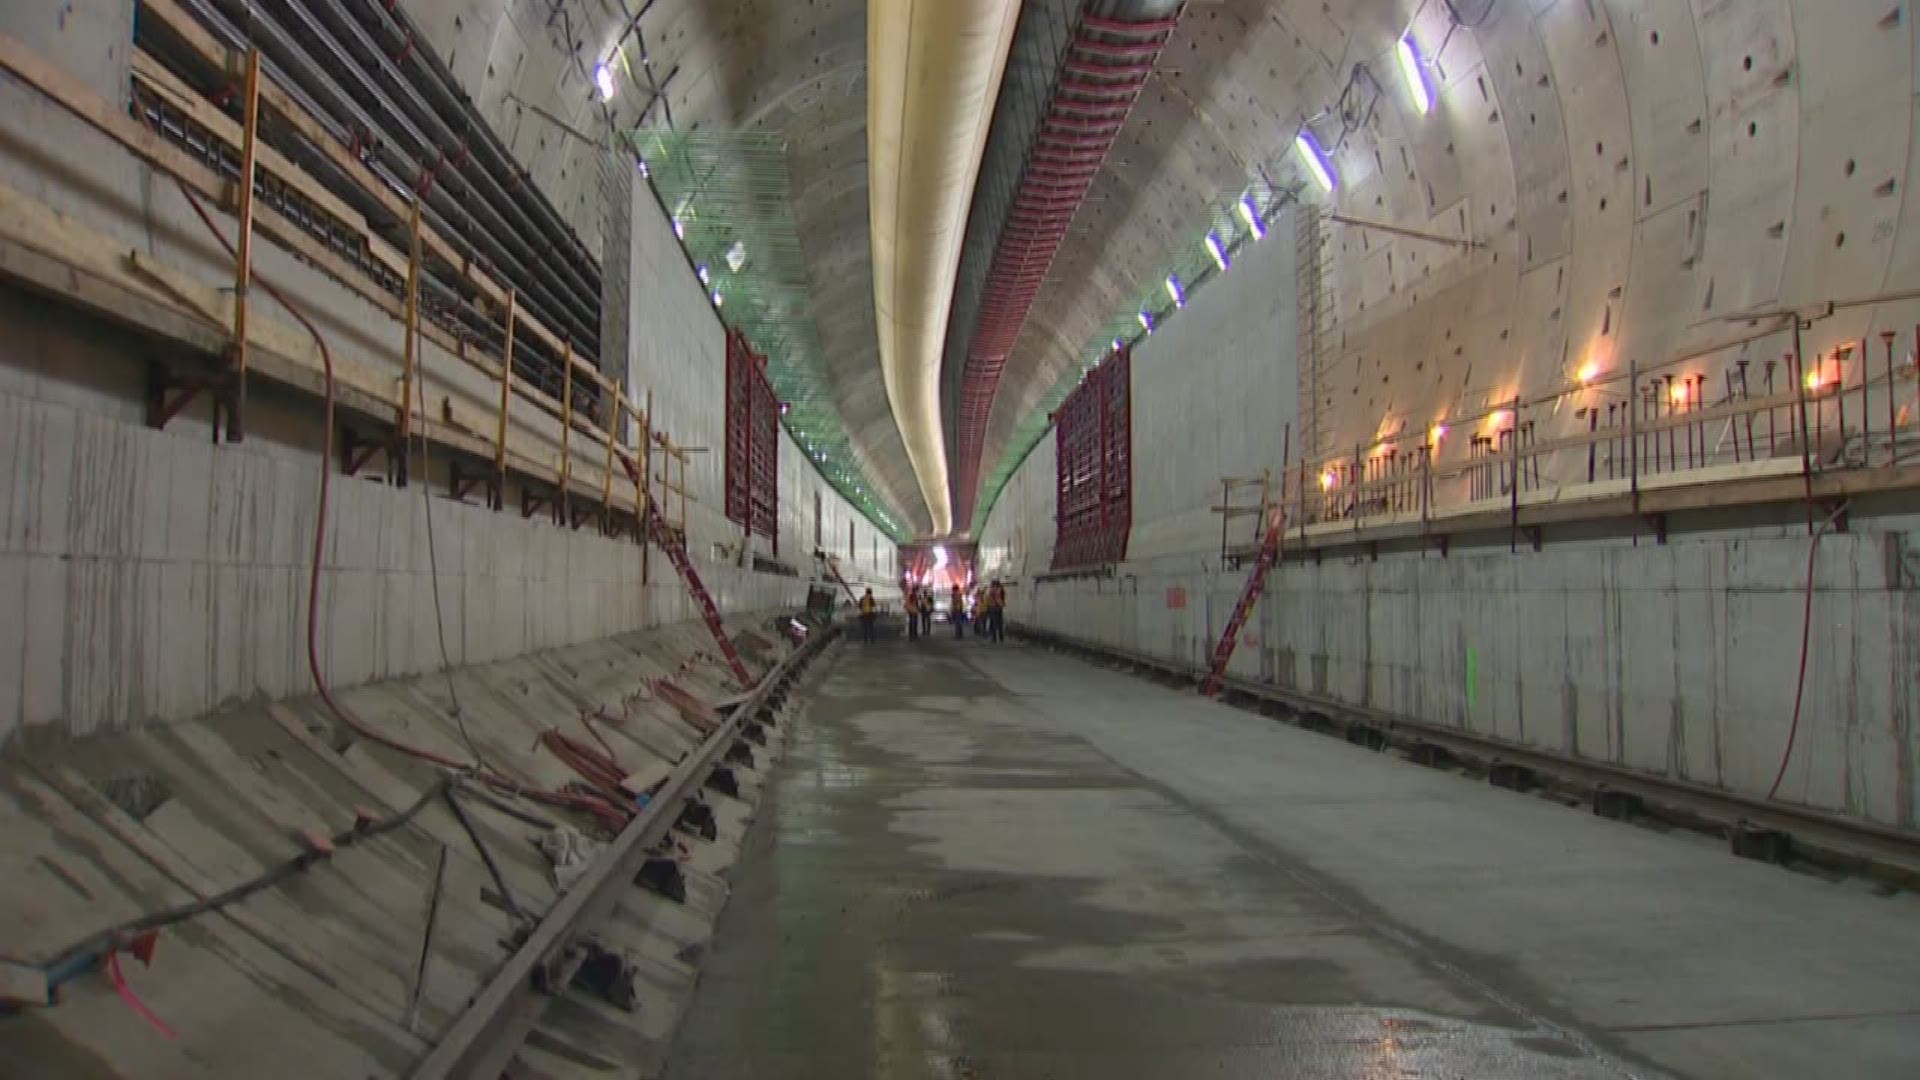 Glenn Farley takes us into the SR 99 tunnel, which is expected to open during the Spring of 2018.